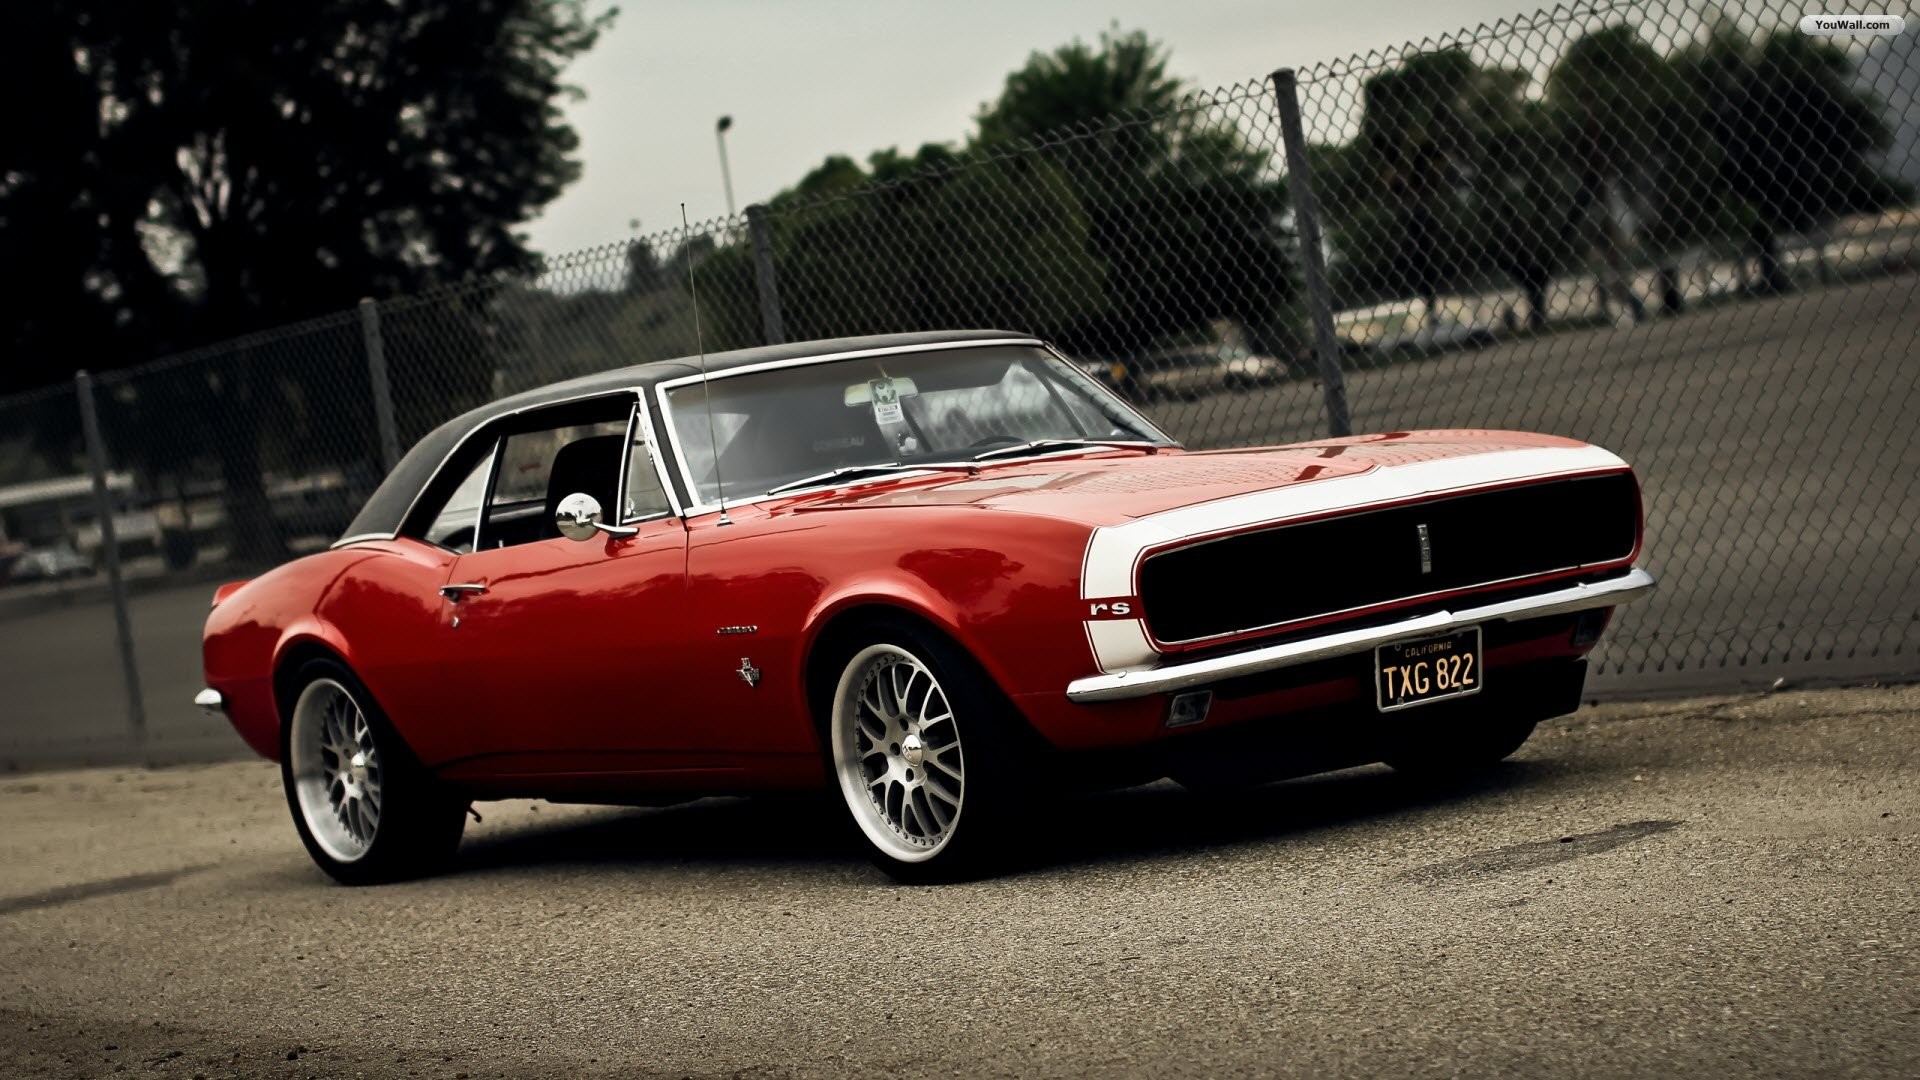 1920x1080 Muscle cars hd pc wallpapers